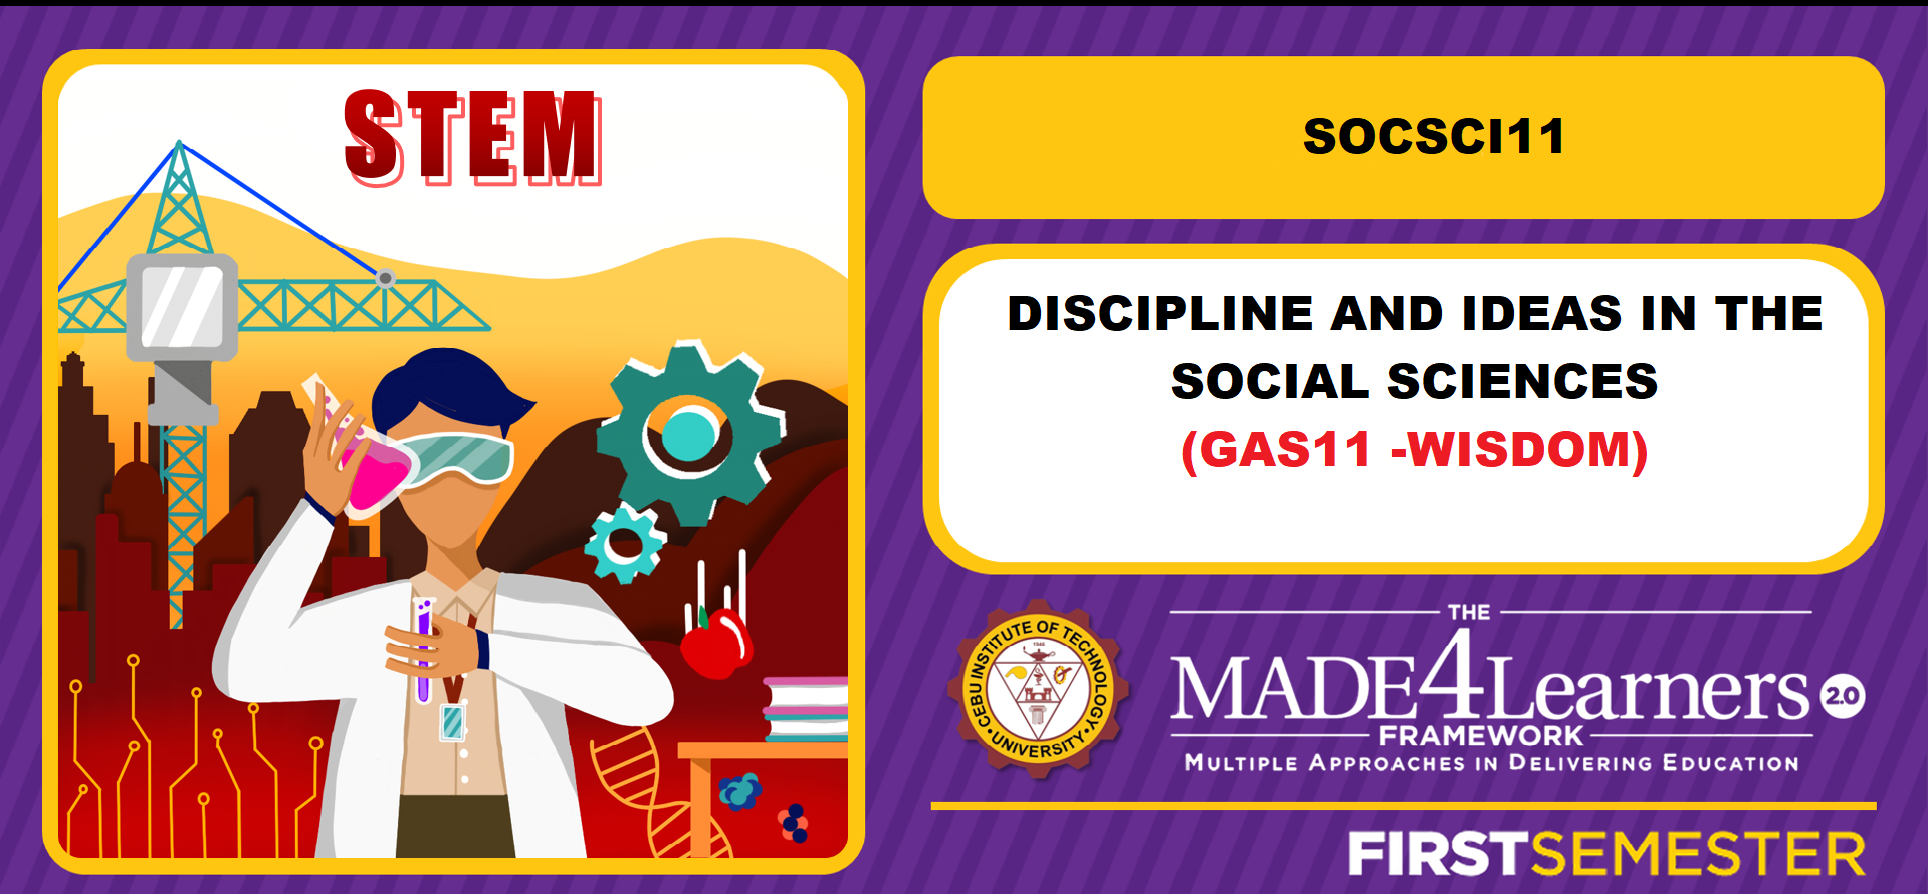 SOCSCI11: Discipline and Ideas in the Social Sciences (Alesna)